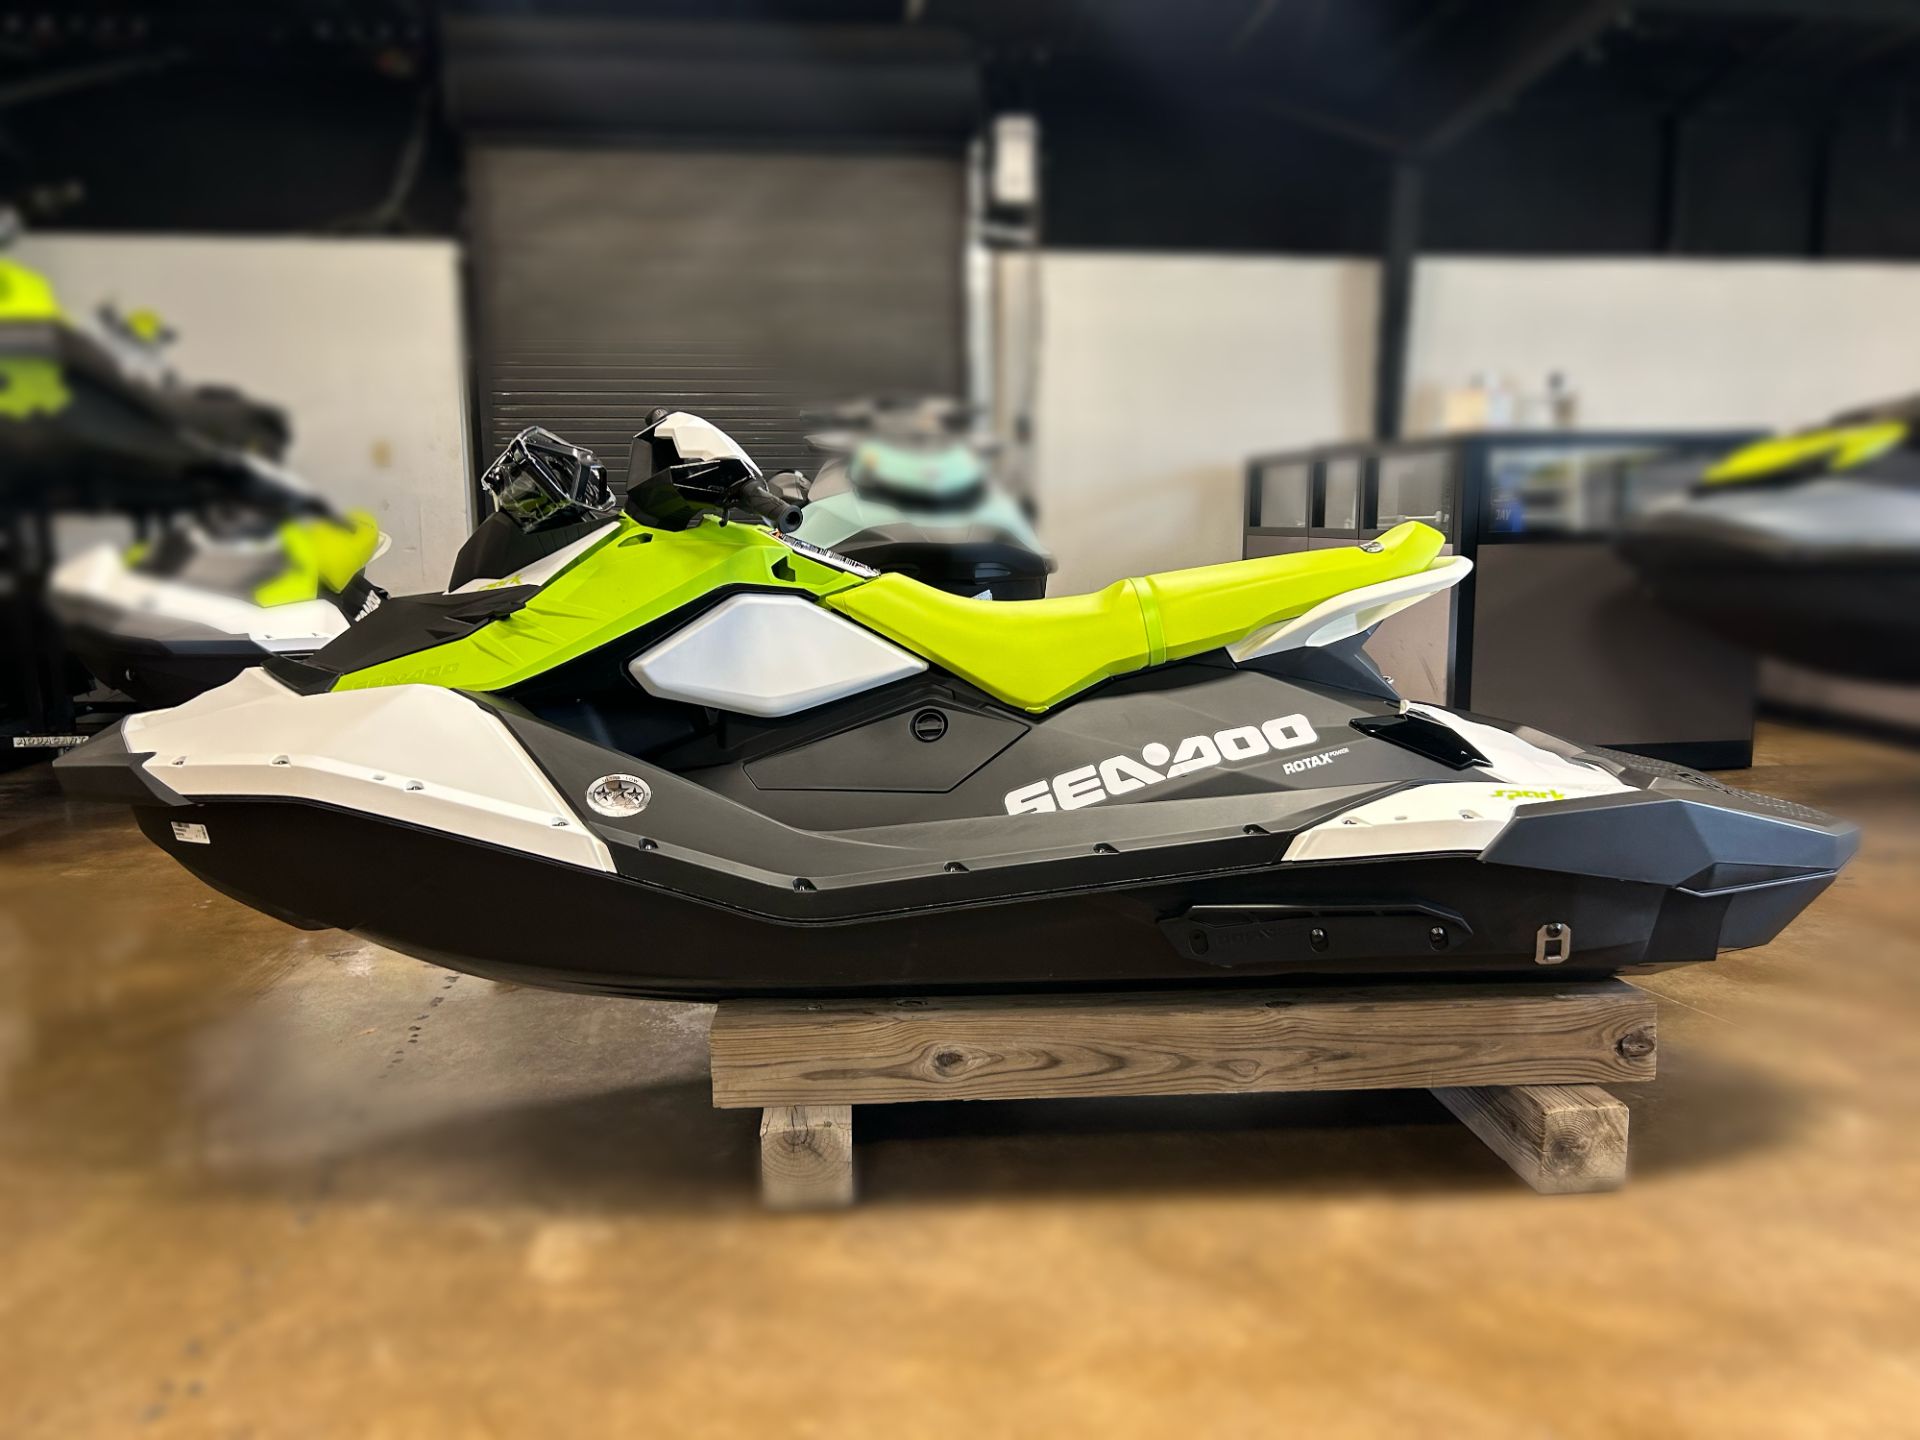 2023 Sea-Doo Spark 3up 90 hp iBR + Sound System Convenience Package Plus in Greenville, Texas - Photo 3